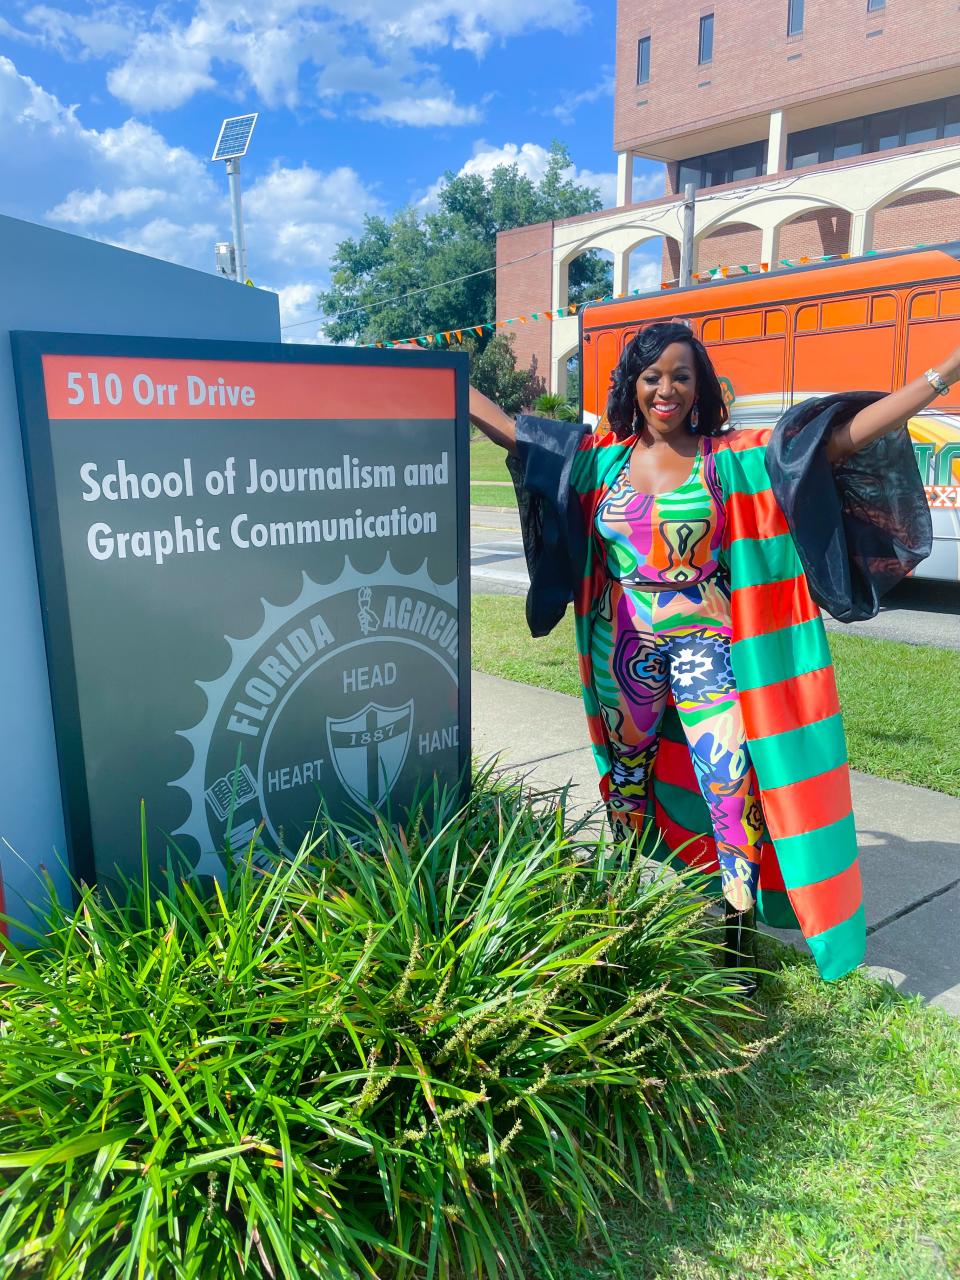 Melissa Mitchell is an alumna of Florida A&M University who graduated from FAMU's School of Journalism & Graphic Communication in 2004.